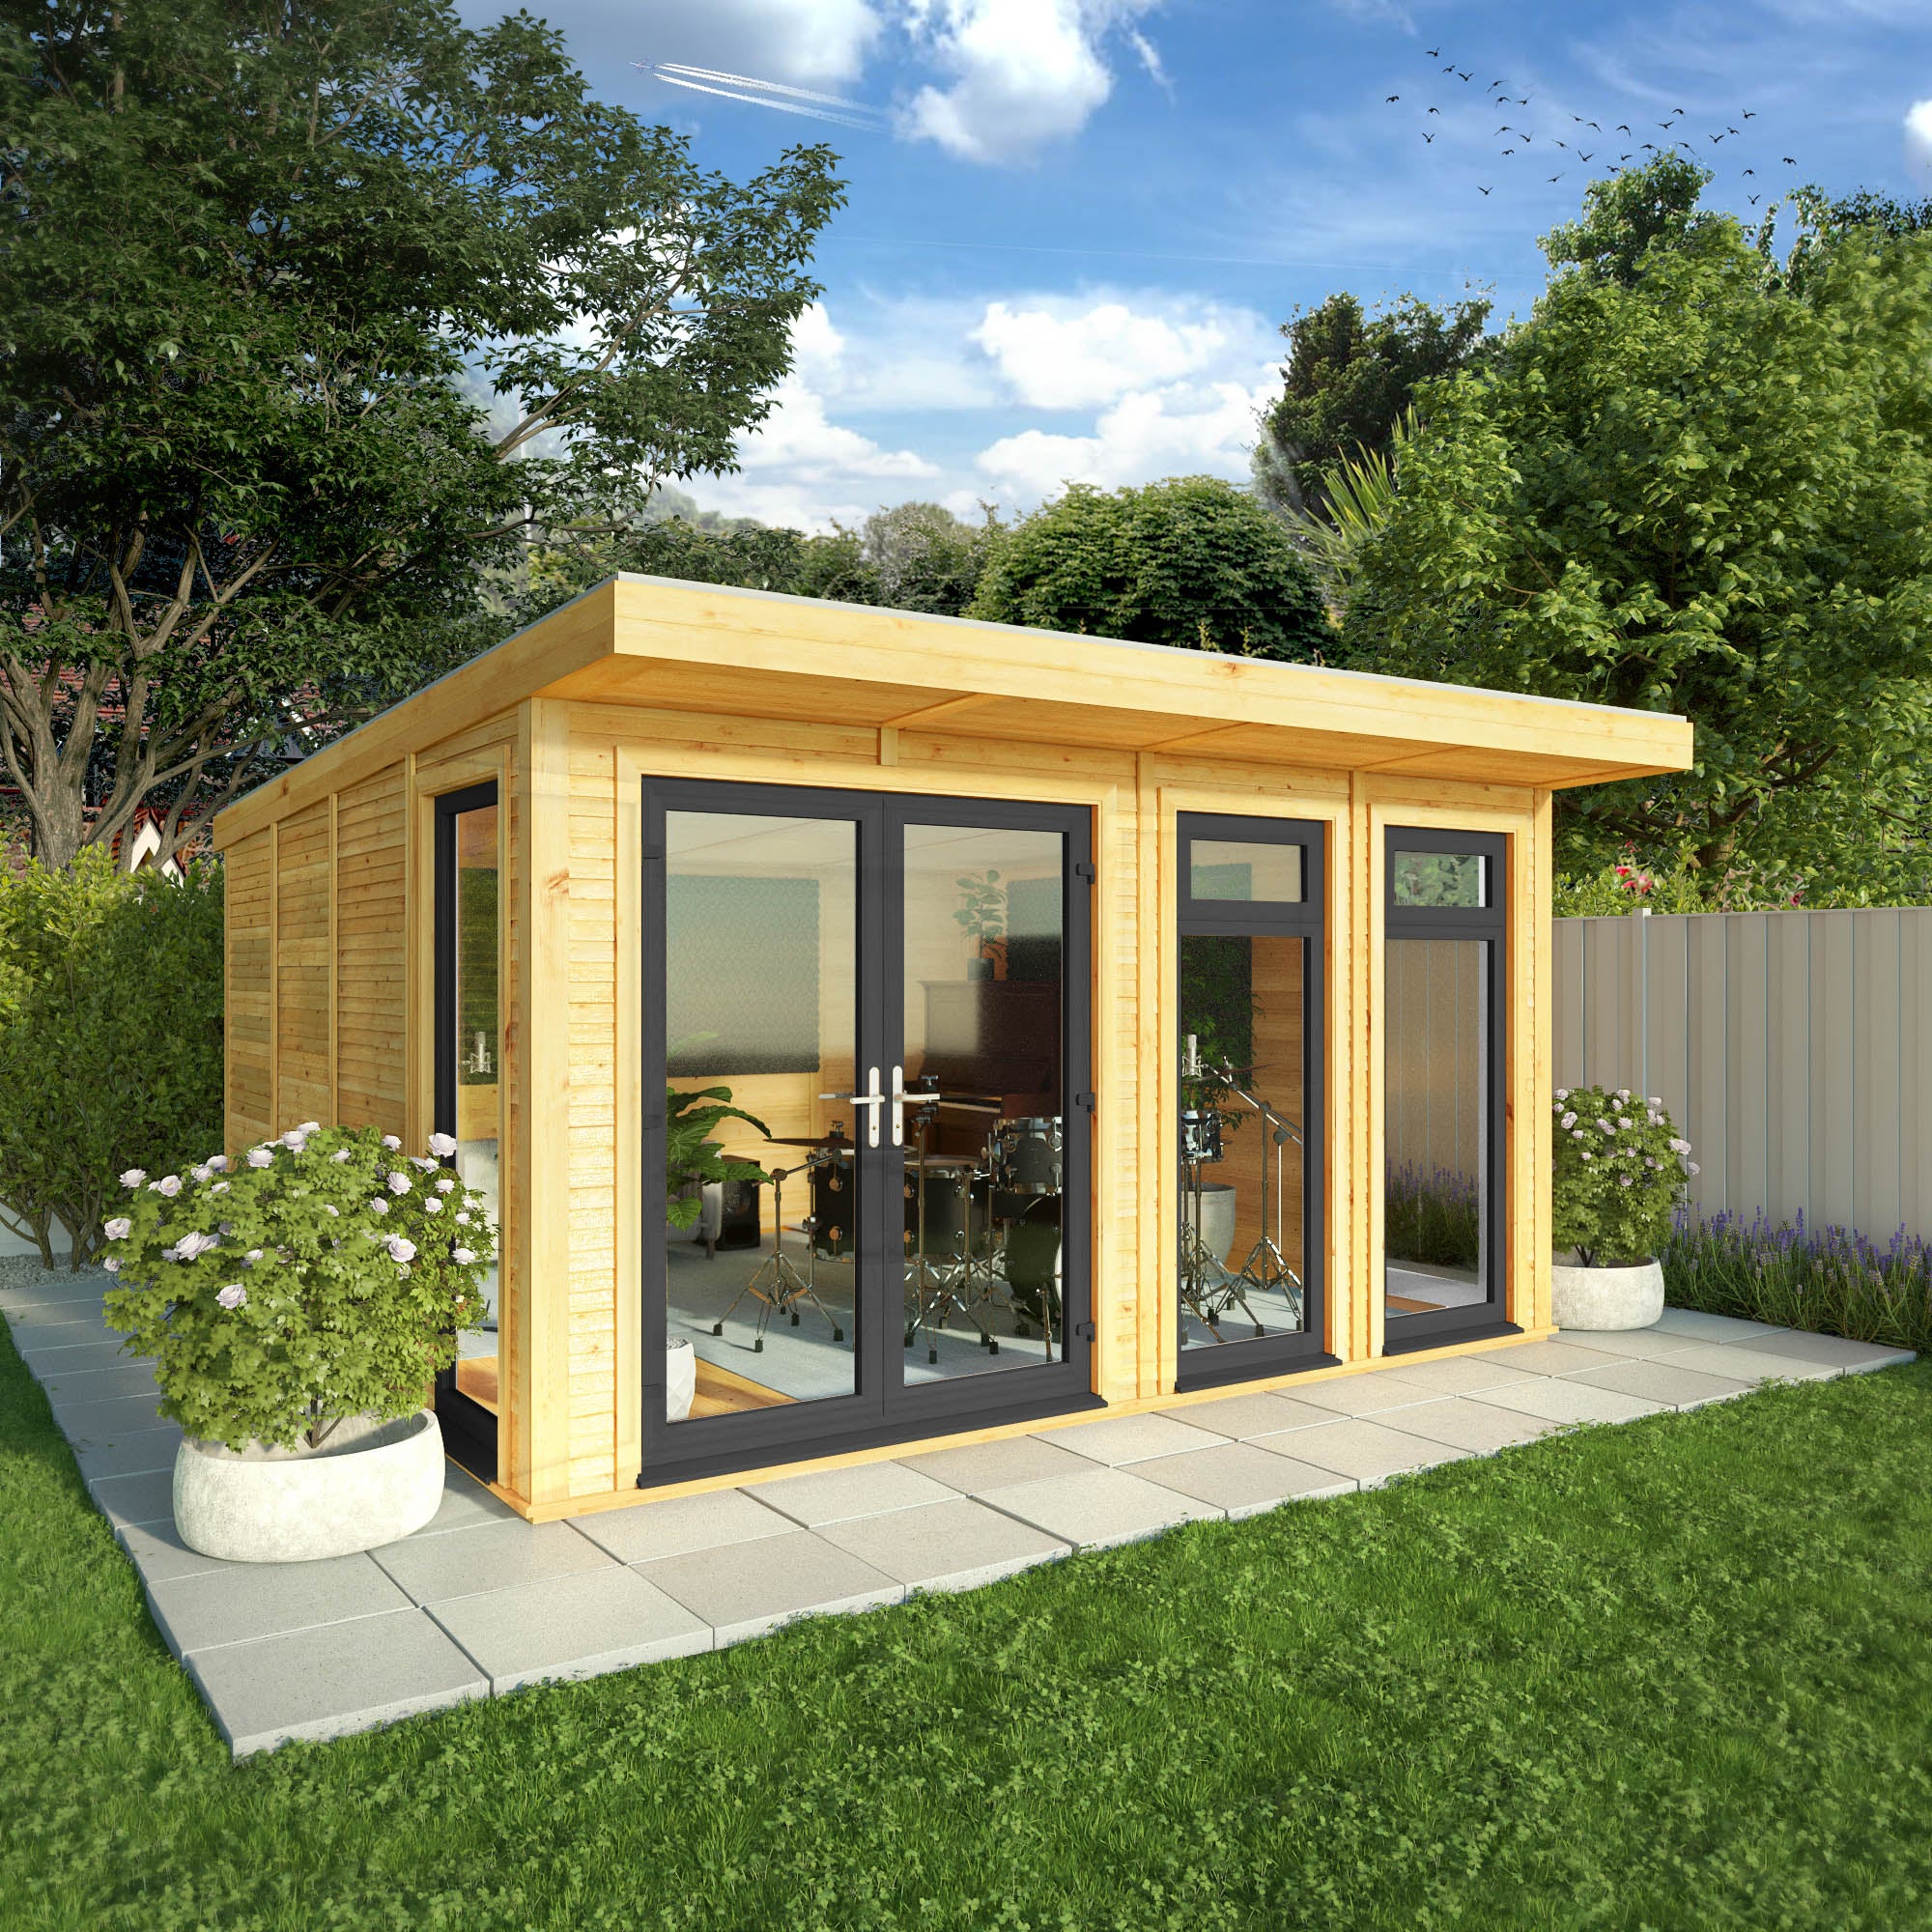 The Edwinstowe 4m x 4m Premium Insulated Garden Room with Anthracite UPVC